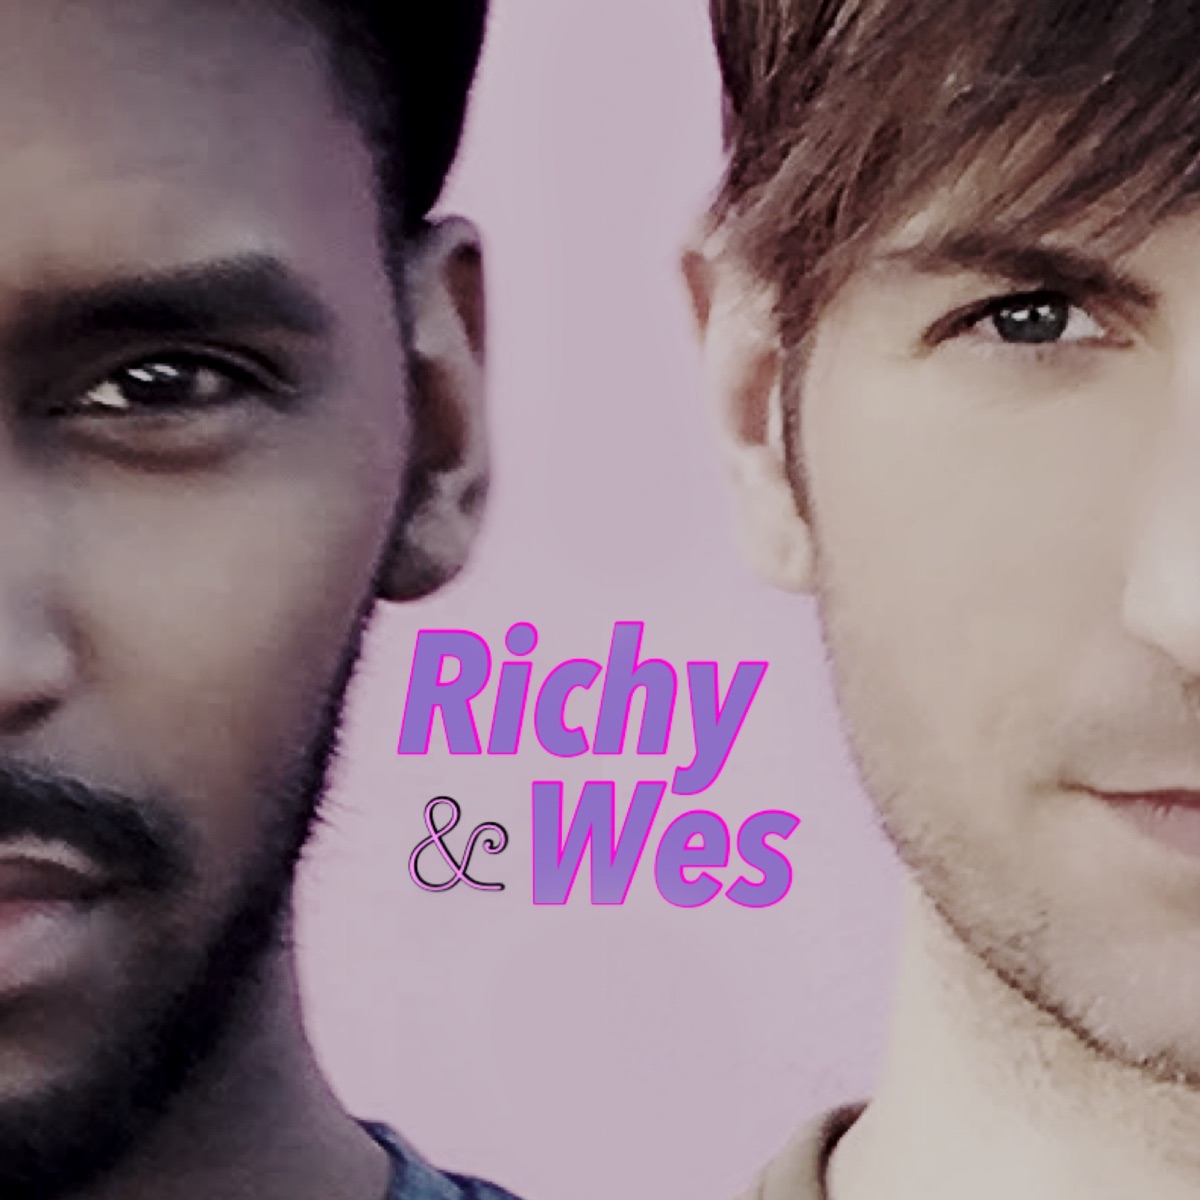 OnlyFans! + Chris Evans, Tom Cruise, Elon Musk, Joe Exotic, Chrissy Teigen,  Britney, Wendy WIlliams, Naomi Campbell, Tyra Banks, Top Model,  Spider-Verse â€“ Richy and Wes (A Shady Hollywood Podcast) â€“ Podcast â€“ Podtail